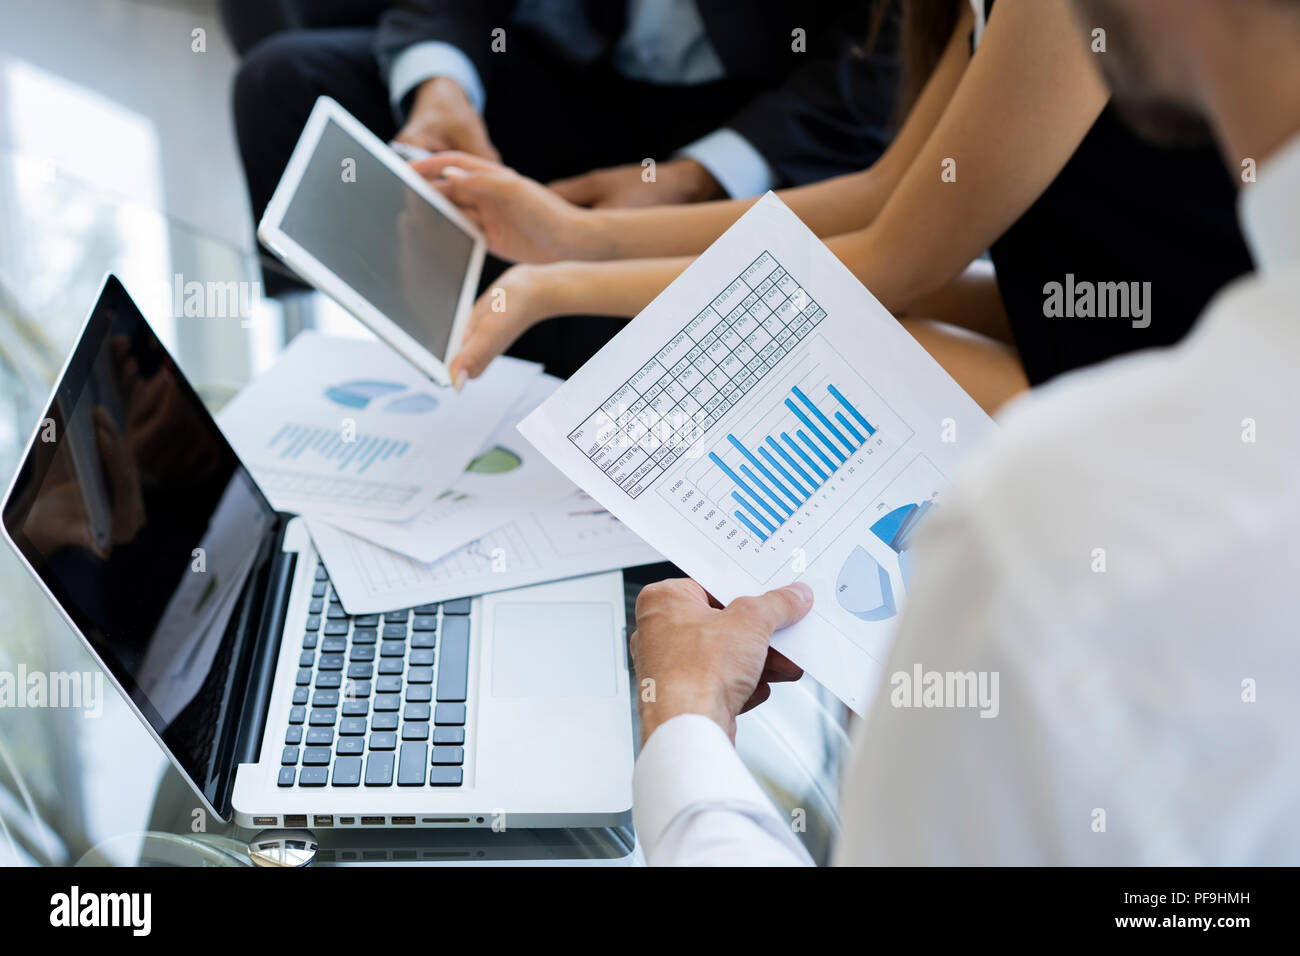 Business People Meeting Design Ideas Concept. business planning Stock Photo